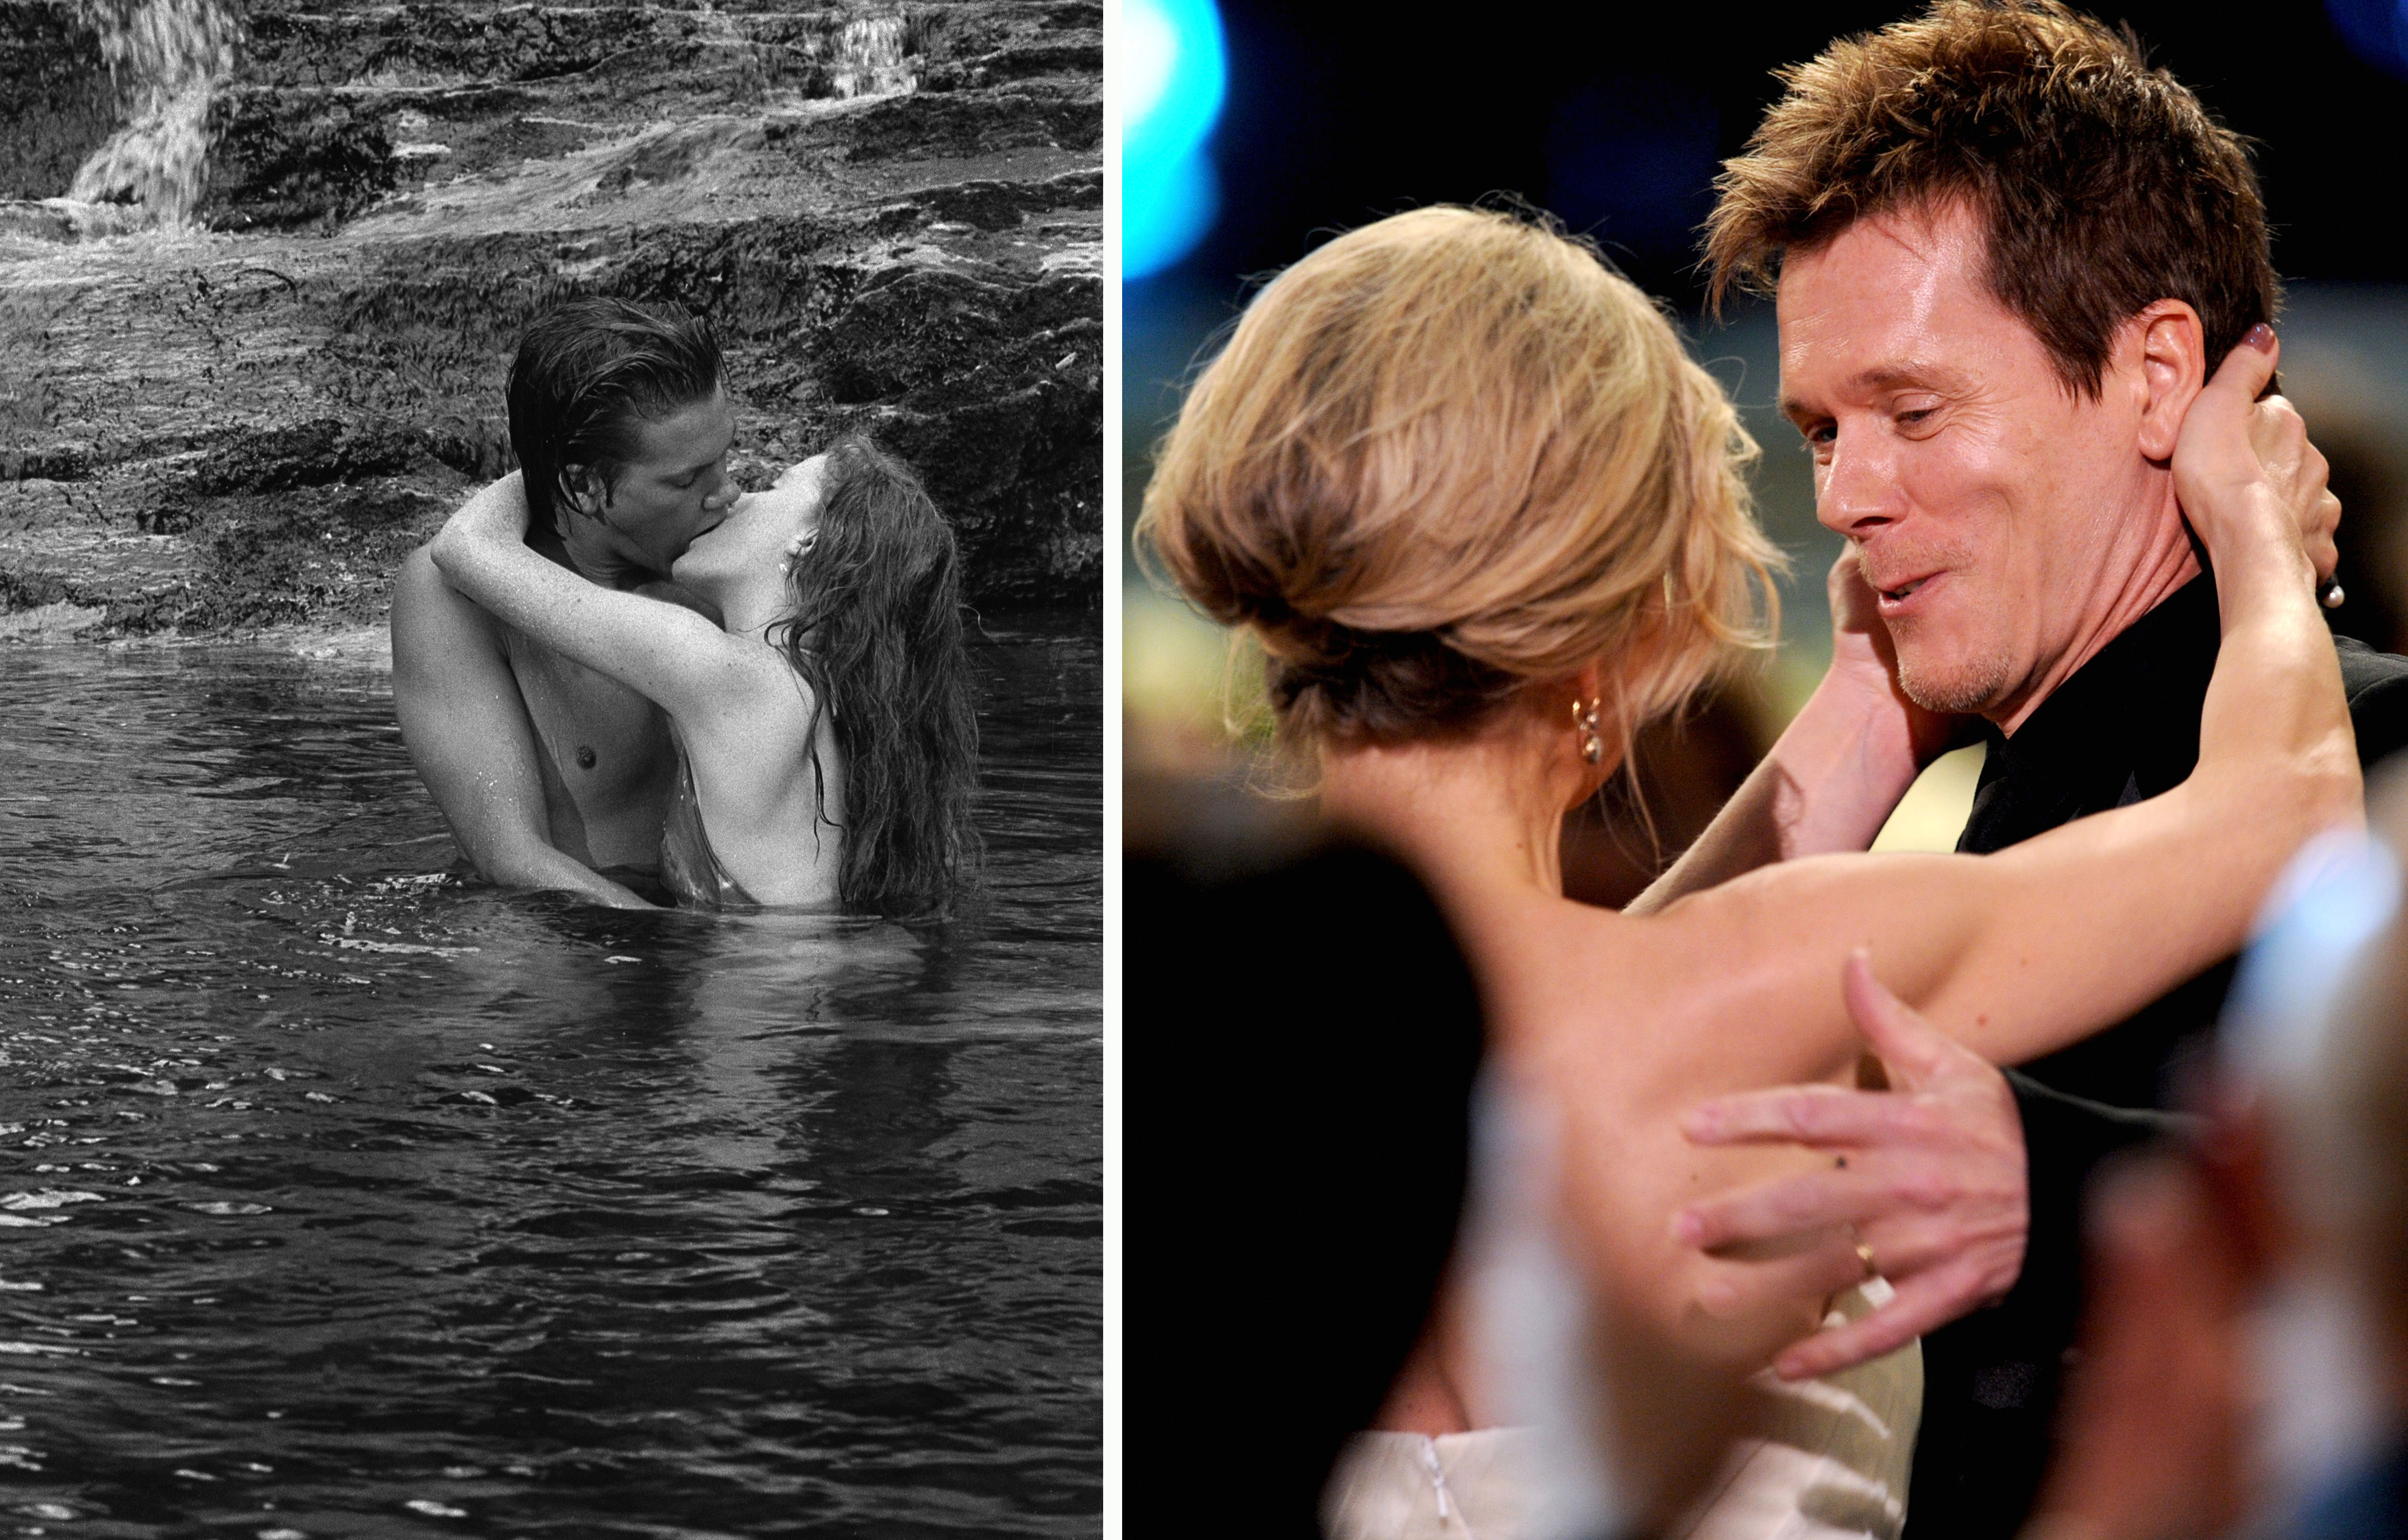 Kevin Bacon as Tim Werner and Kristen Vigard as Morgan Richards in a scene on the soap opera 'Guiding Light' on June 24, 1980. | Kyra Sedgwick and Kevin Bacon kiss at the 16th Annual Screen Actors Guild Awards, on January 23, 2010 in Los Angeles, California. | Source: Getty Images